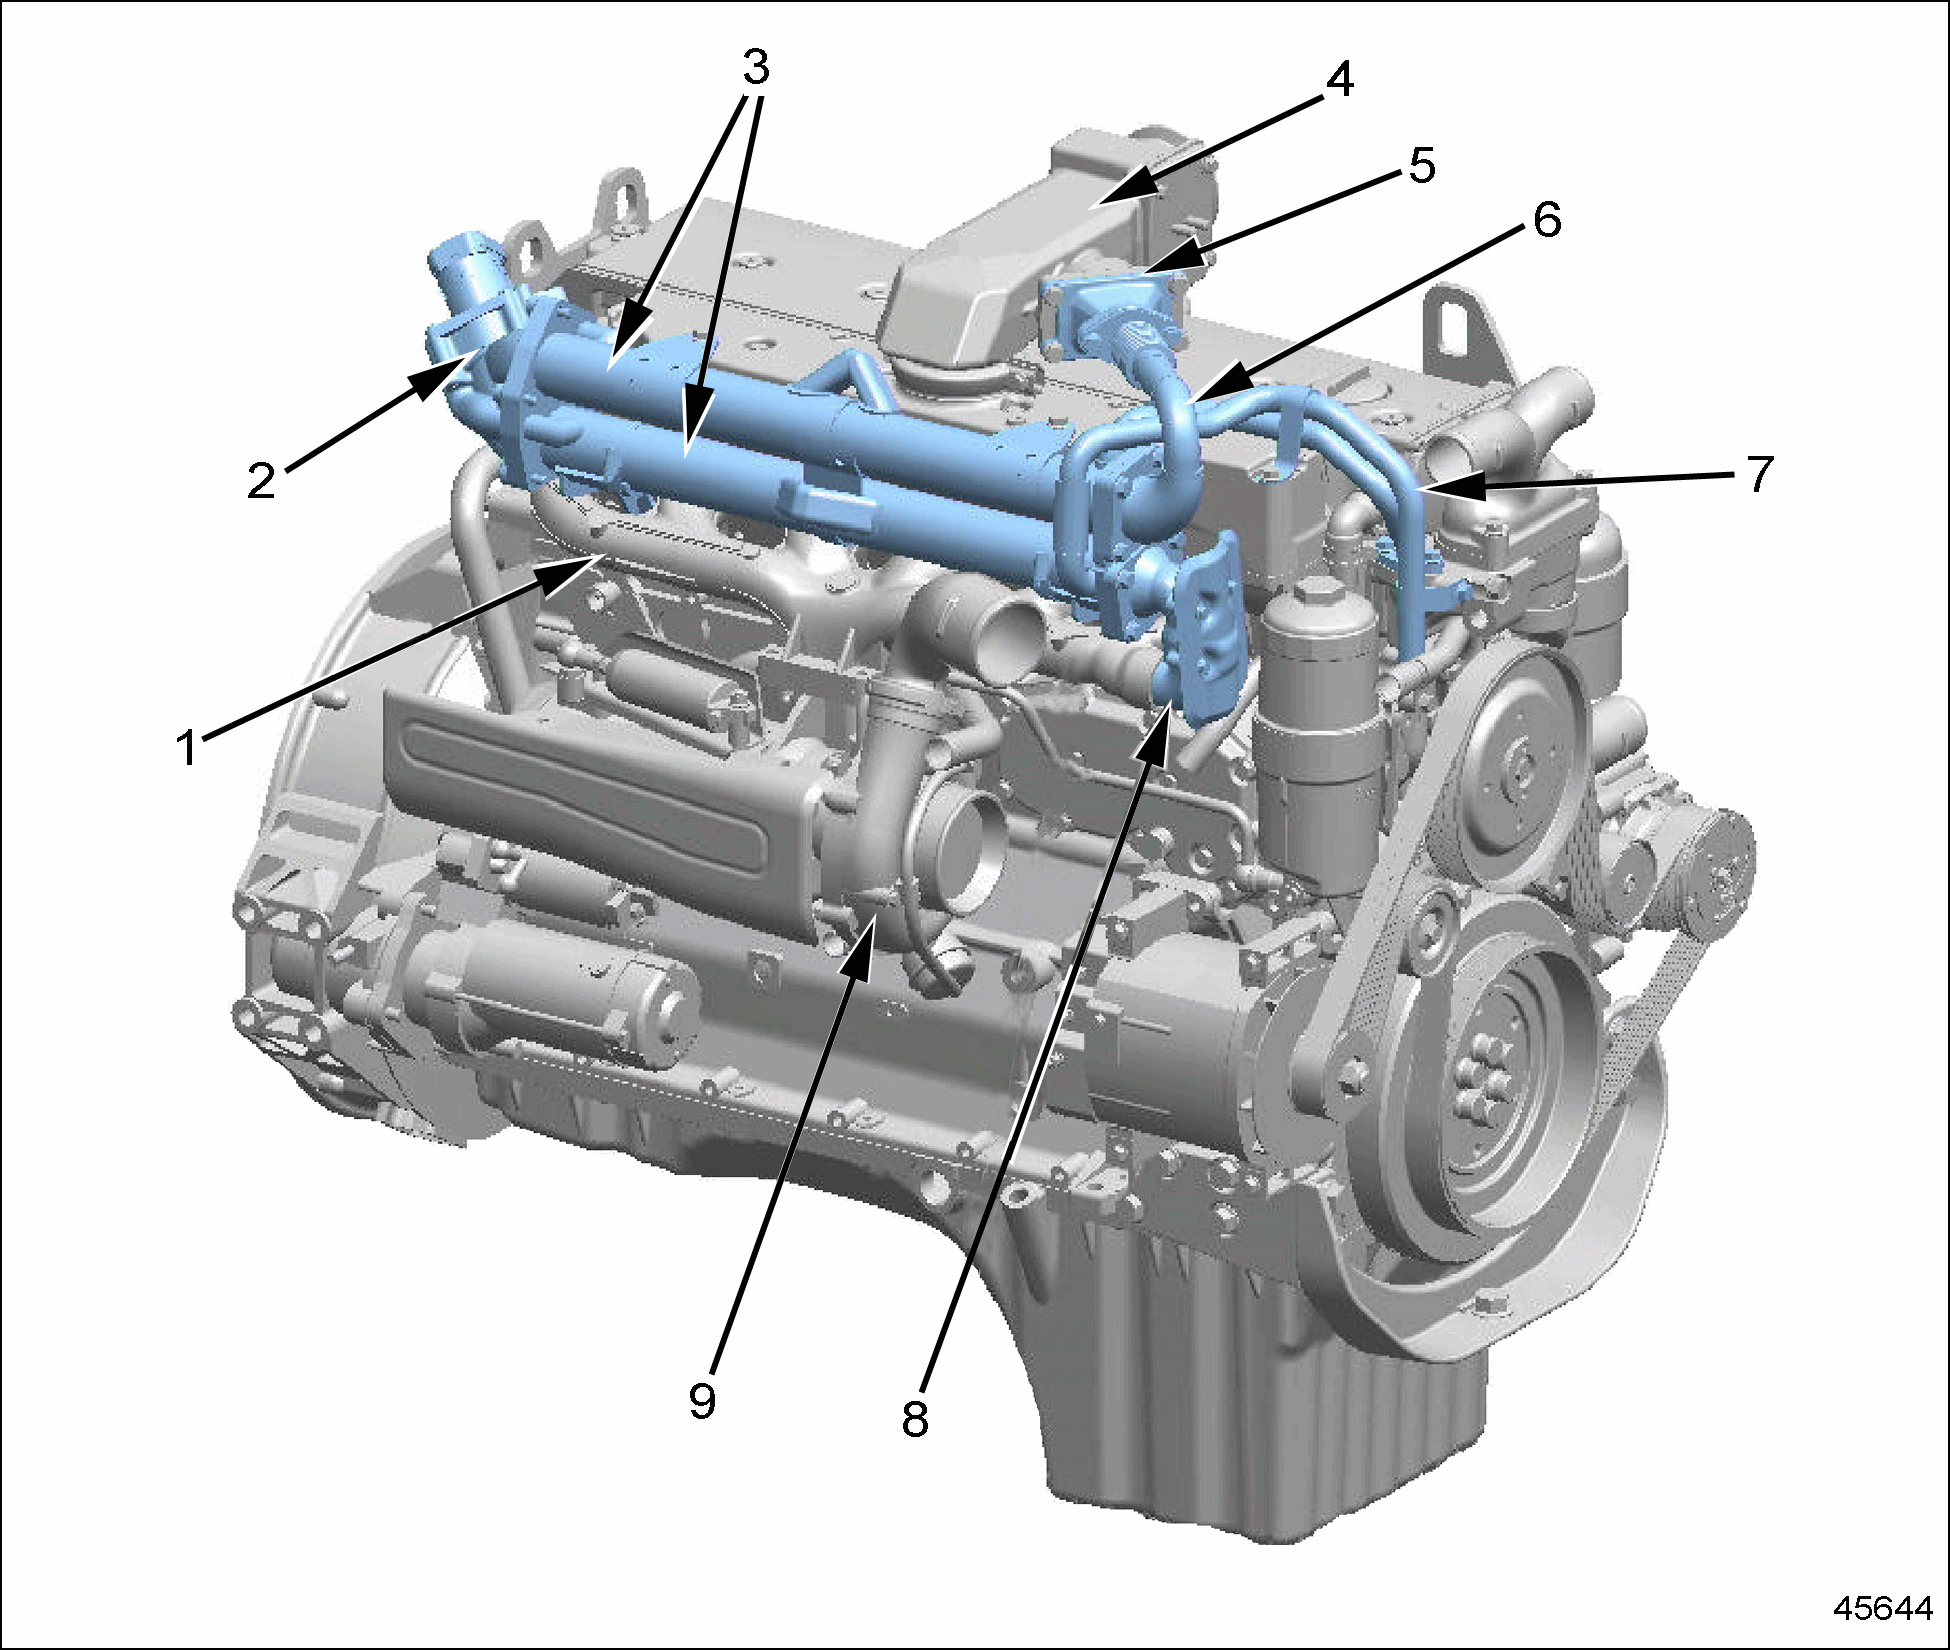 MBE 900 & MBE 4000 EGR - Section 2.2 MBE 900 Engines With EGR Systems